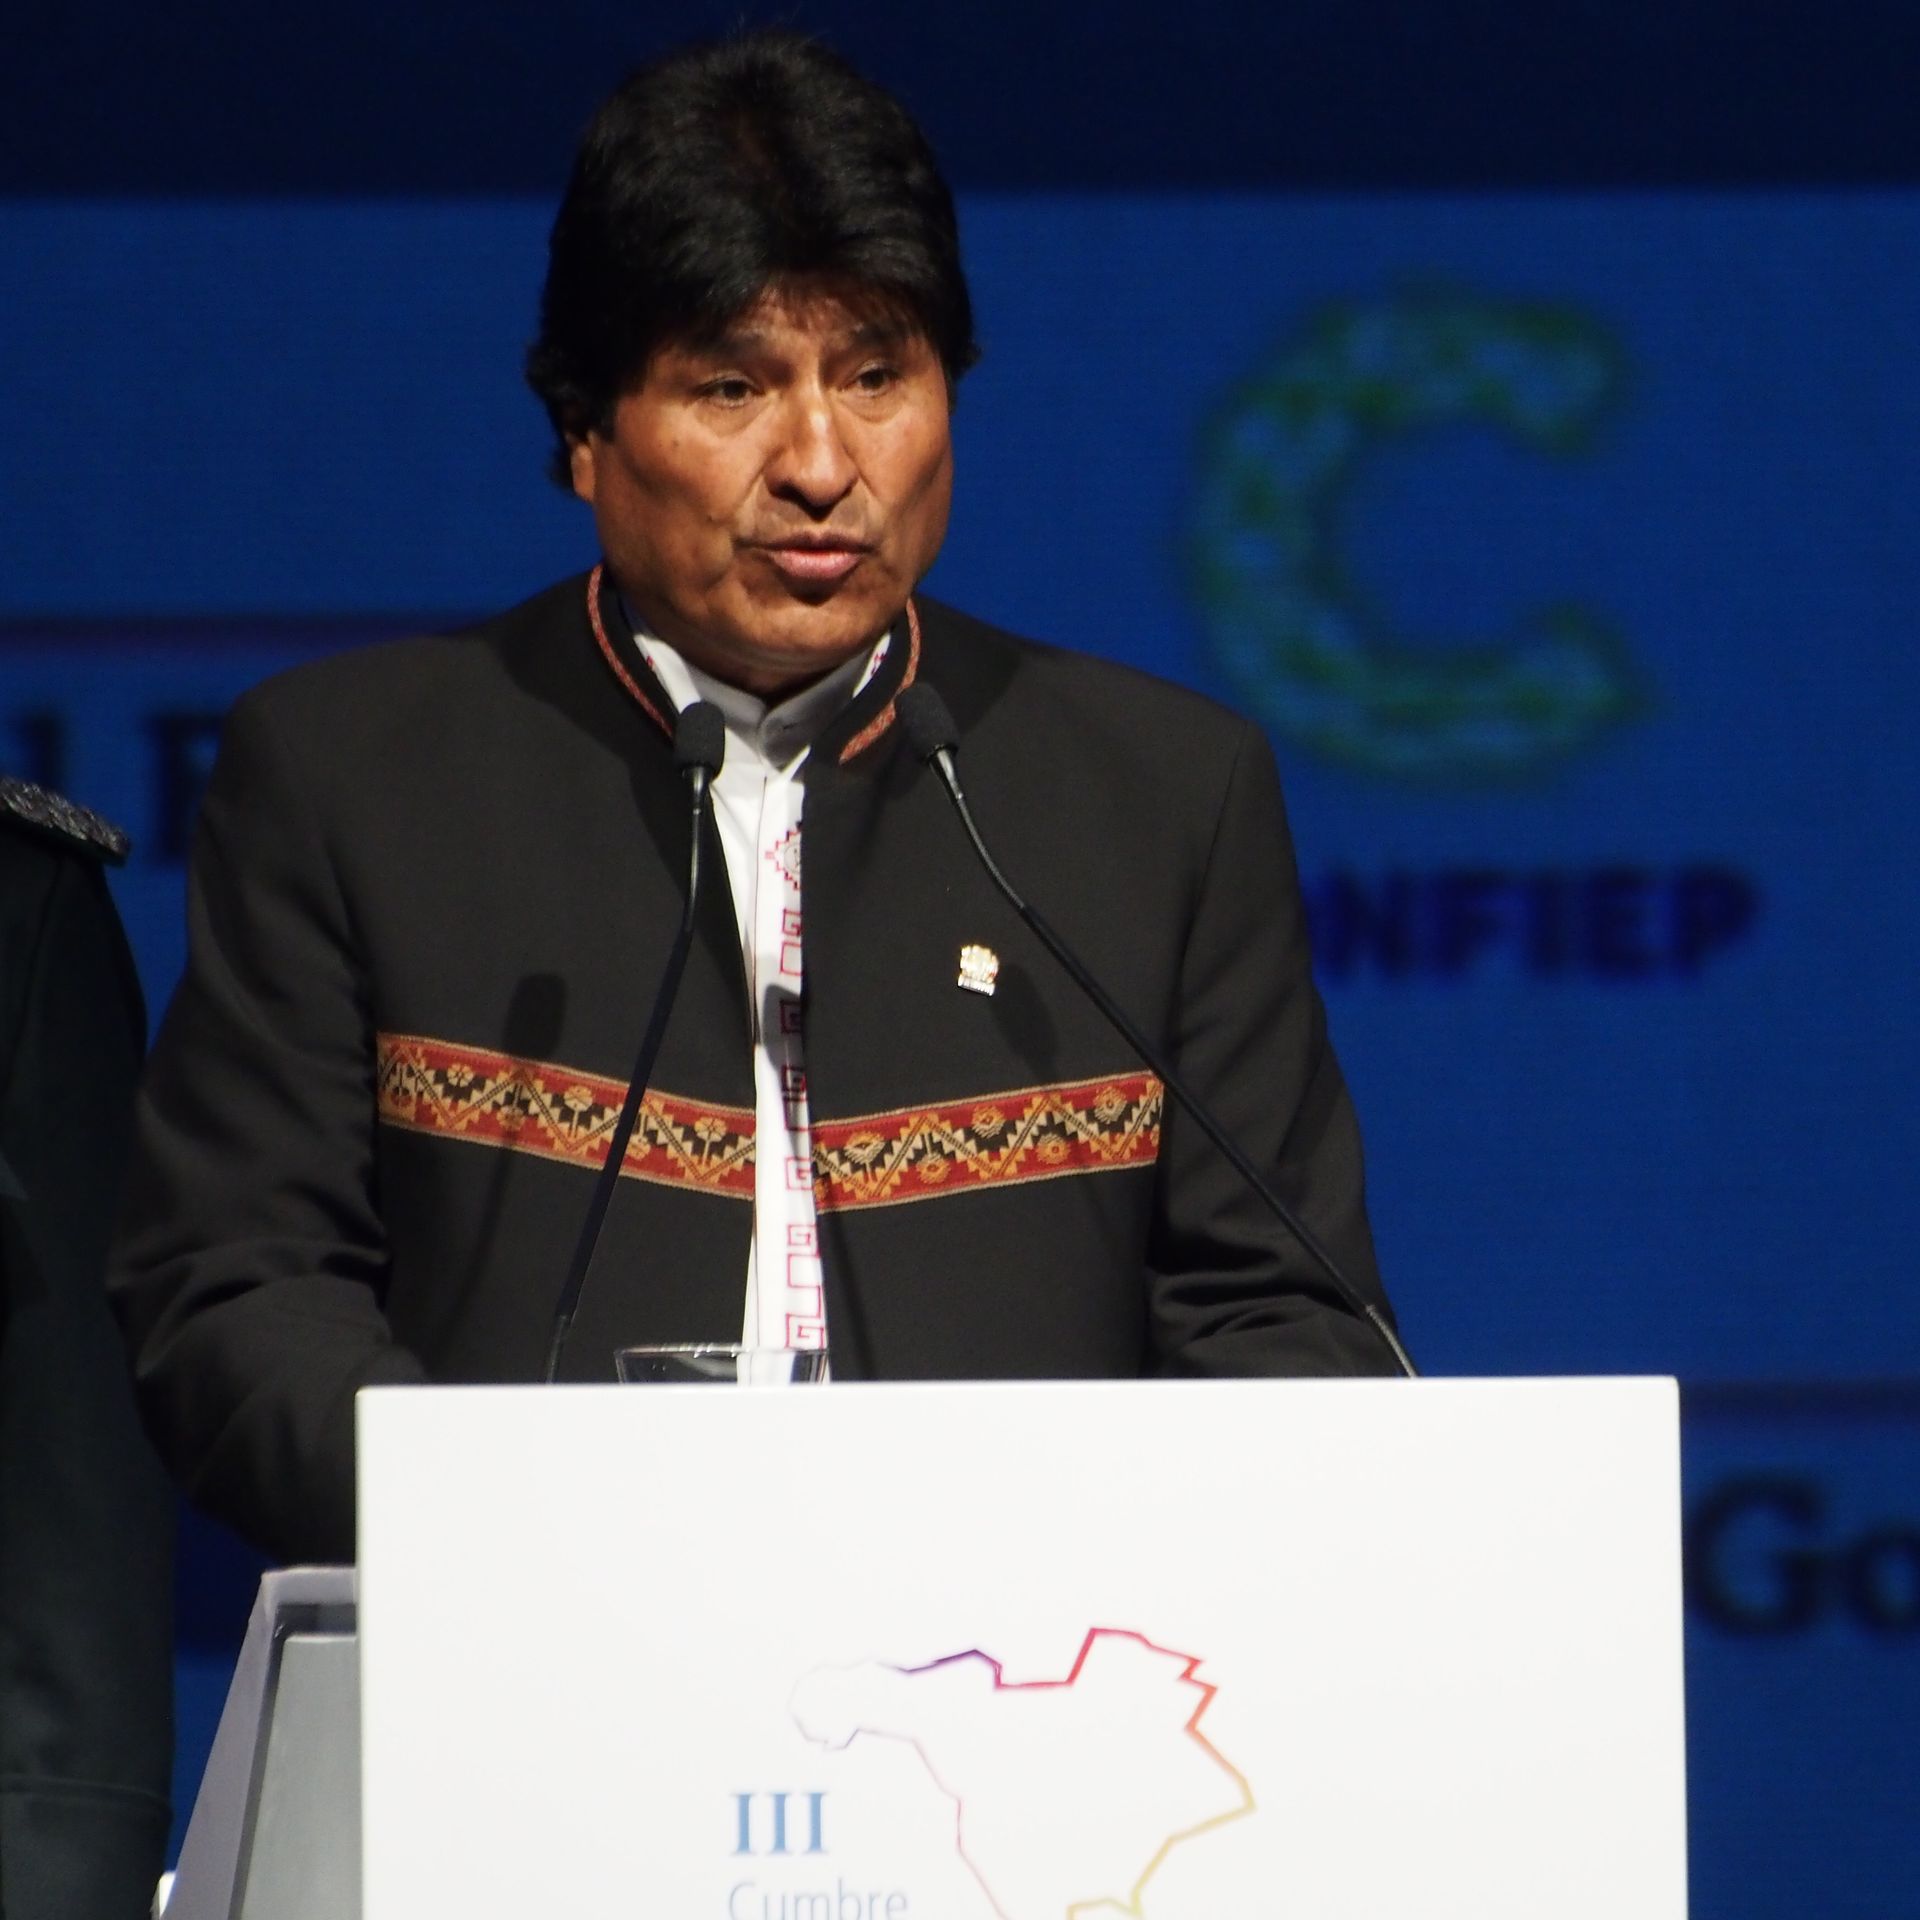 Evo Morales speaking at a lectern